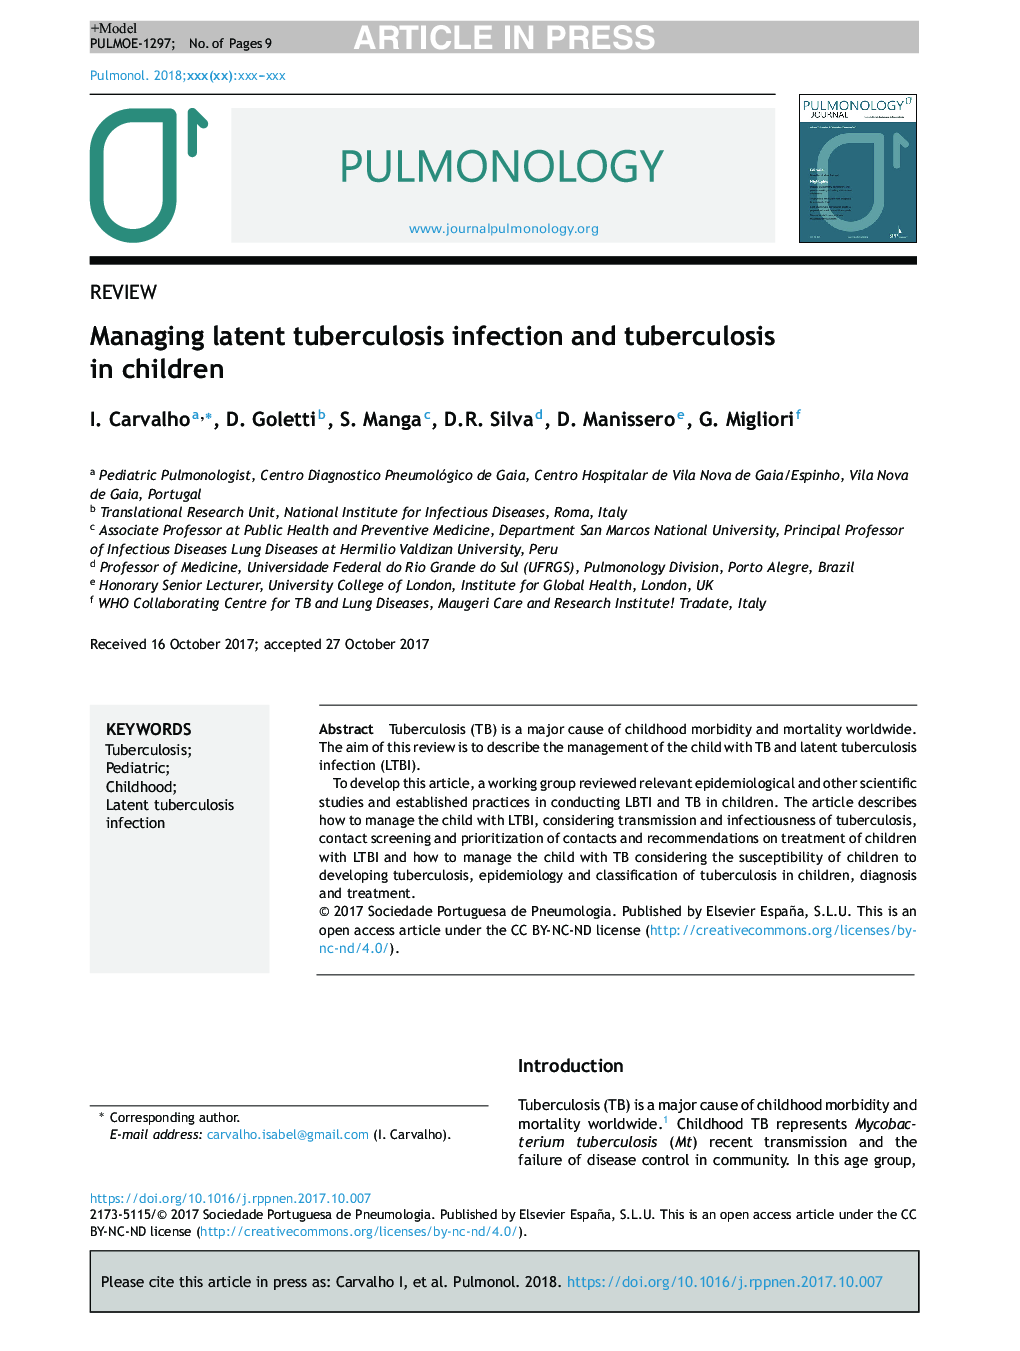 Managing latent tuberculosis infection and tuberculosis in children